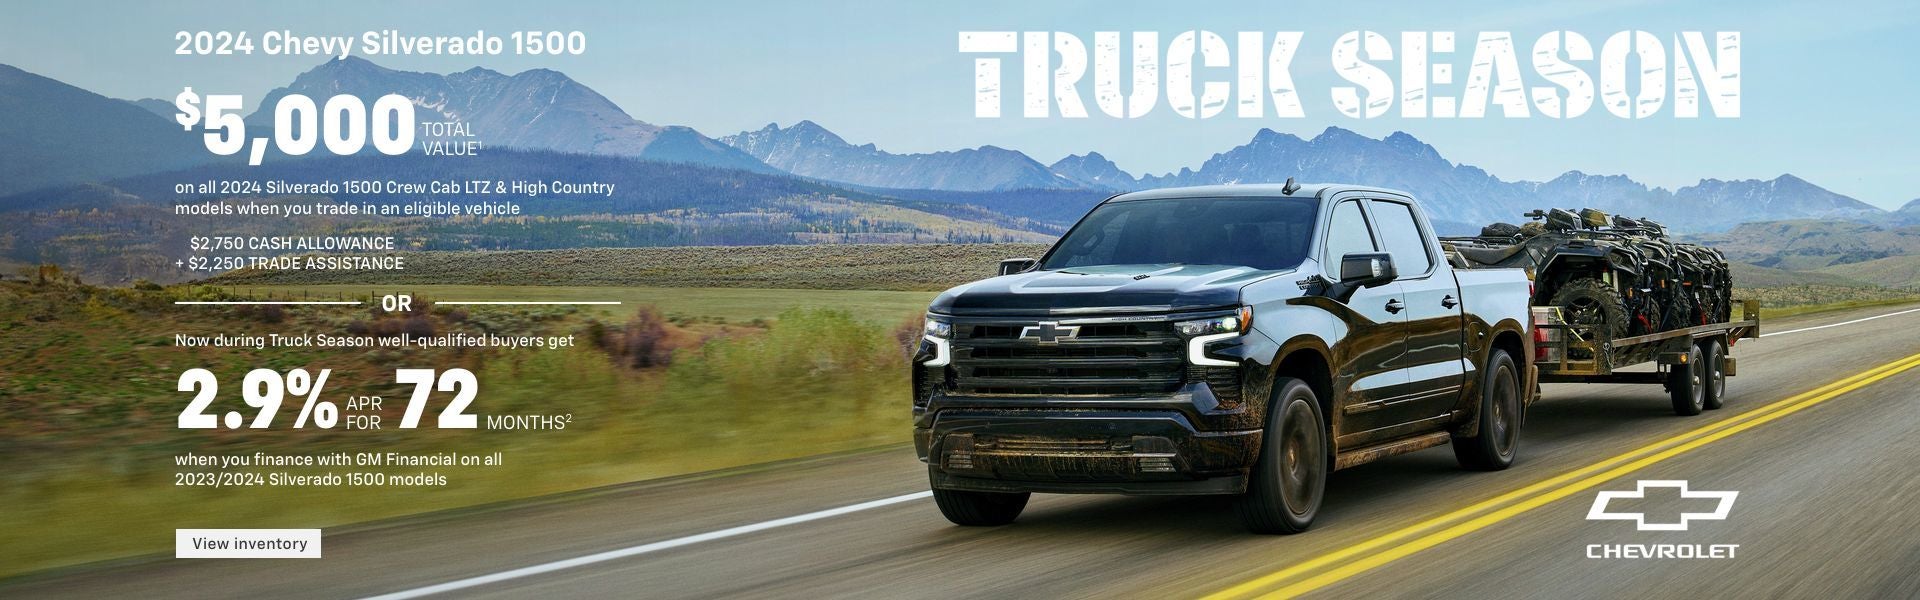 $5,000 total value on all 2024 Silverado 1500 Crew Cab LTZ & High Country models when you trade i...